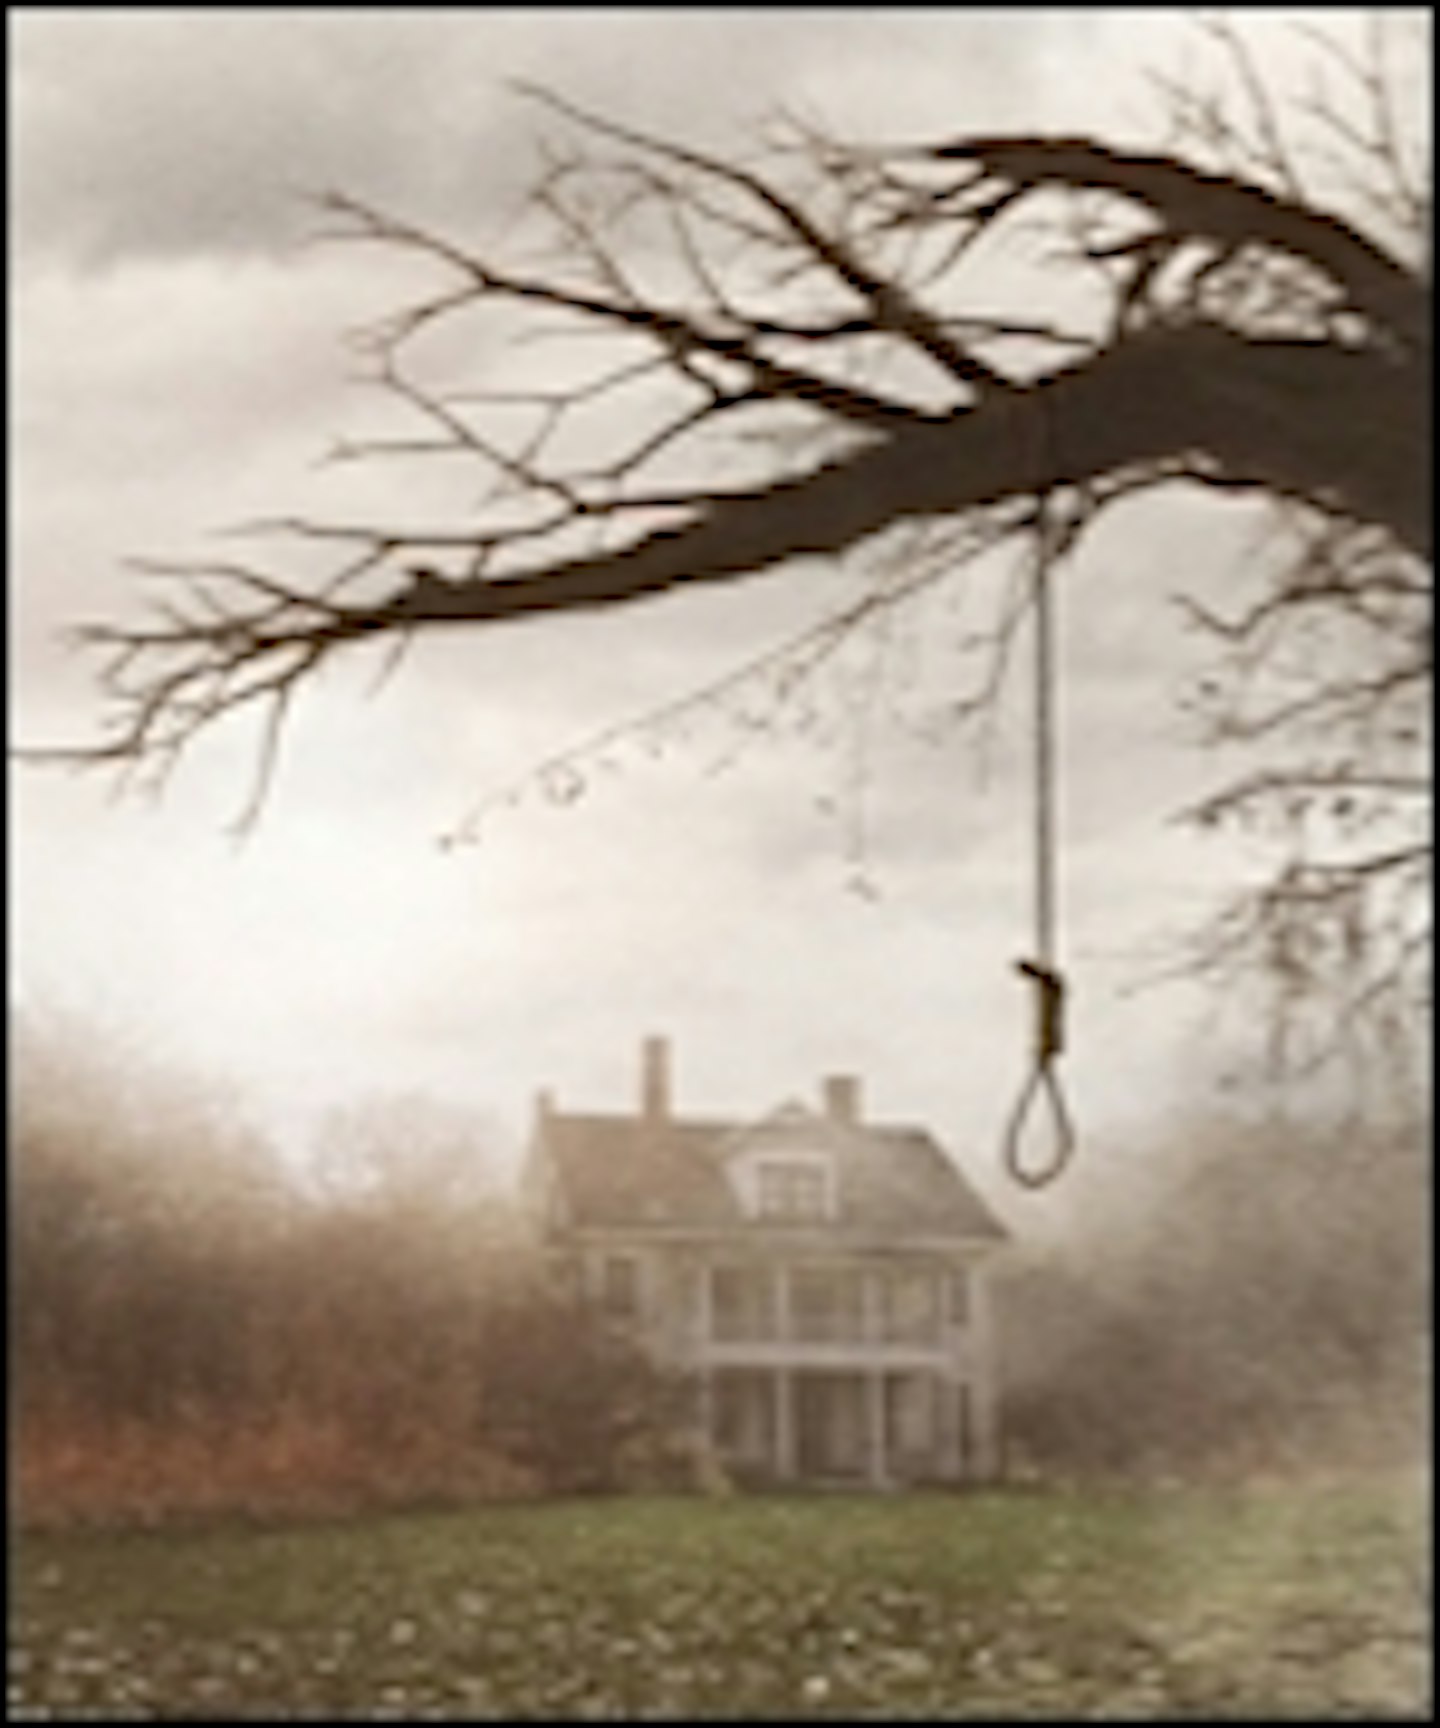 The Conjuring Scares Up A New Poster